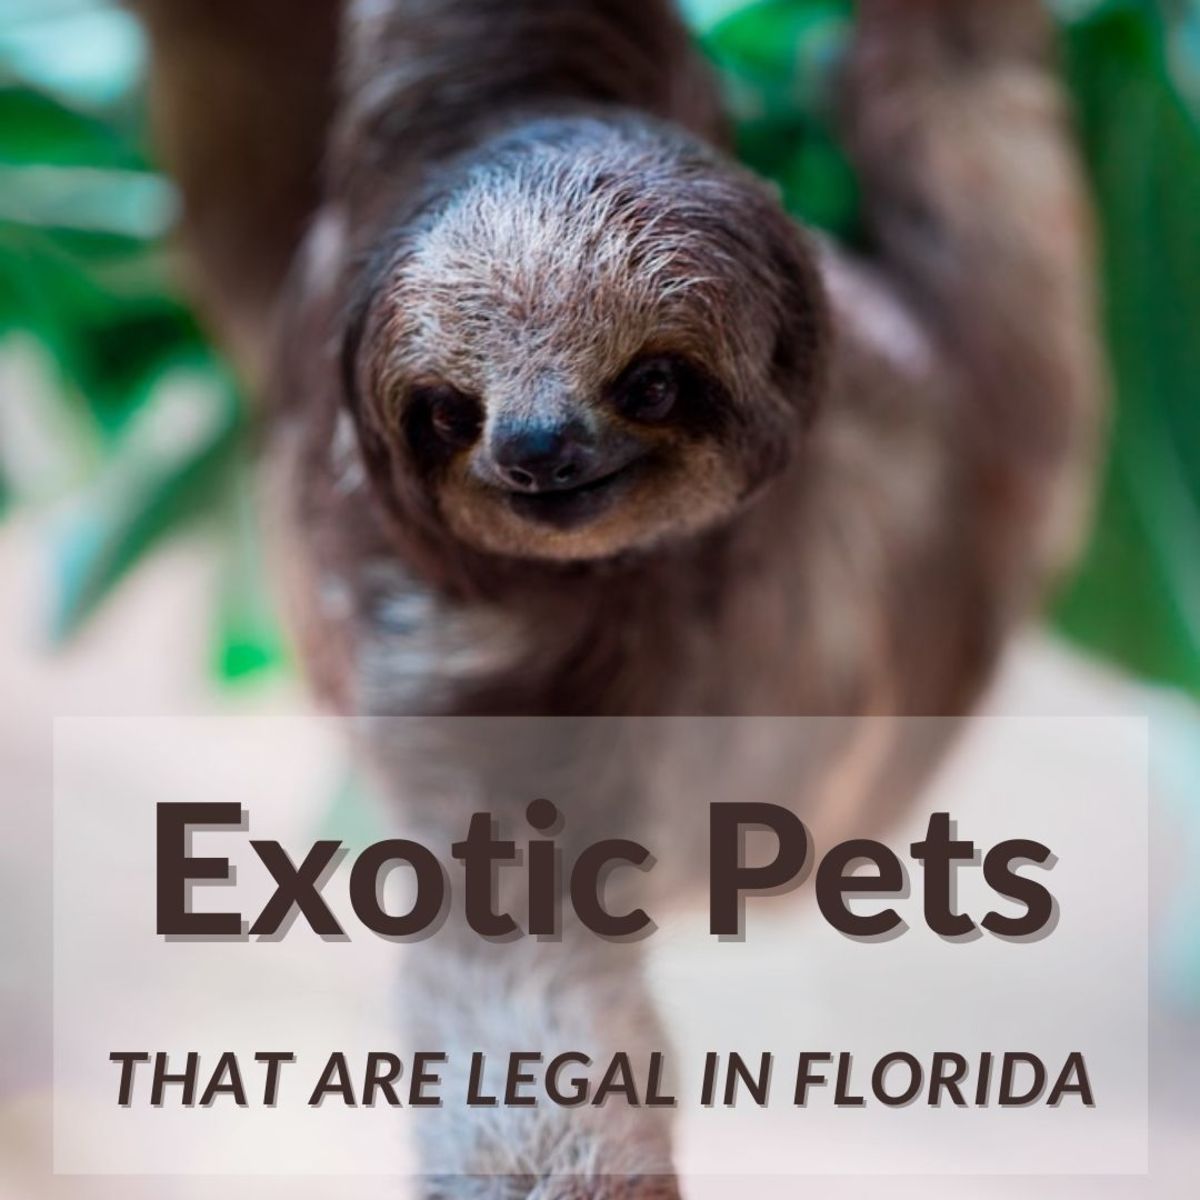 10 Exotic Pets That Are Legal in Florida